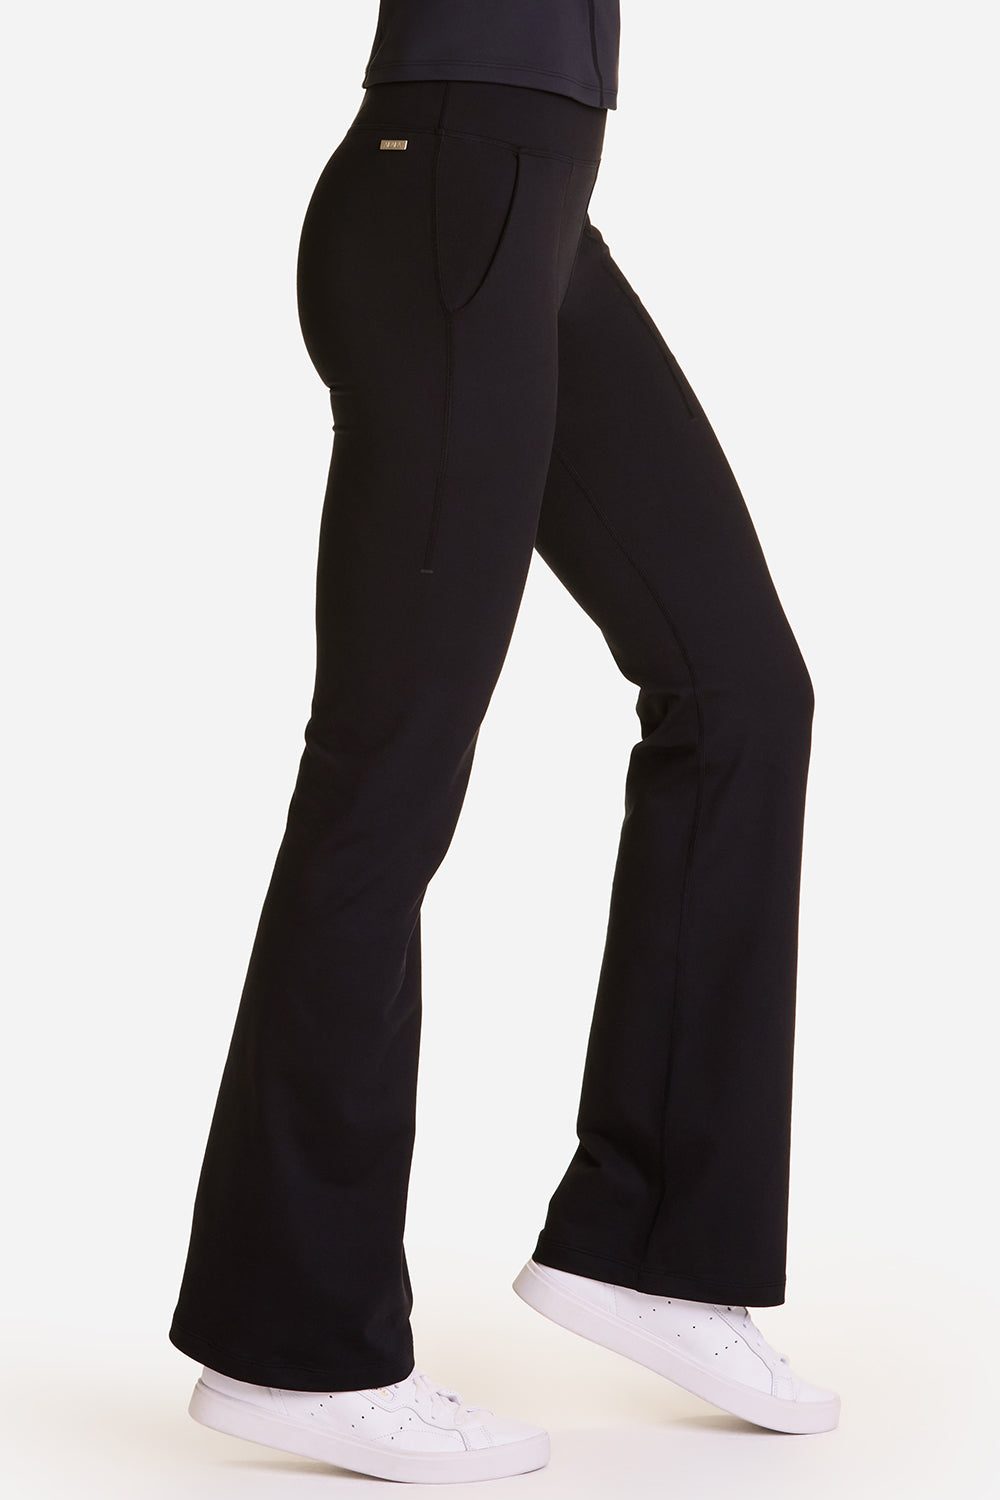 FITTIN Bootcut Yoga Pants for Women with Pockets - Nepal